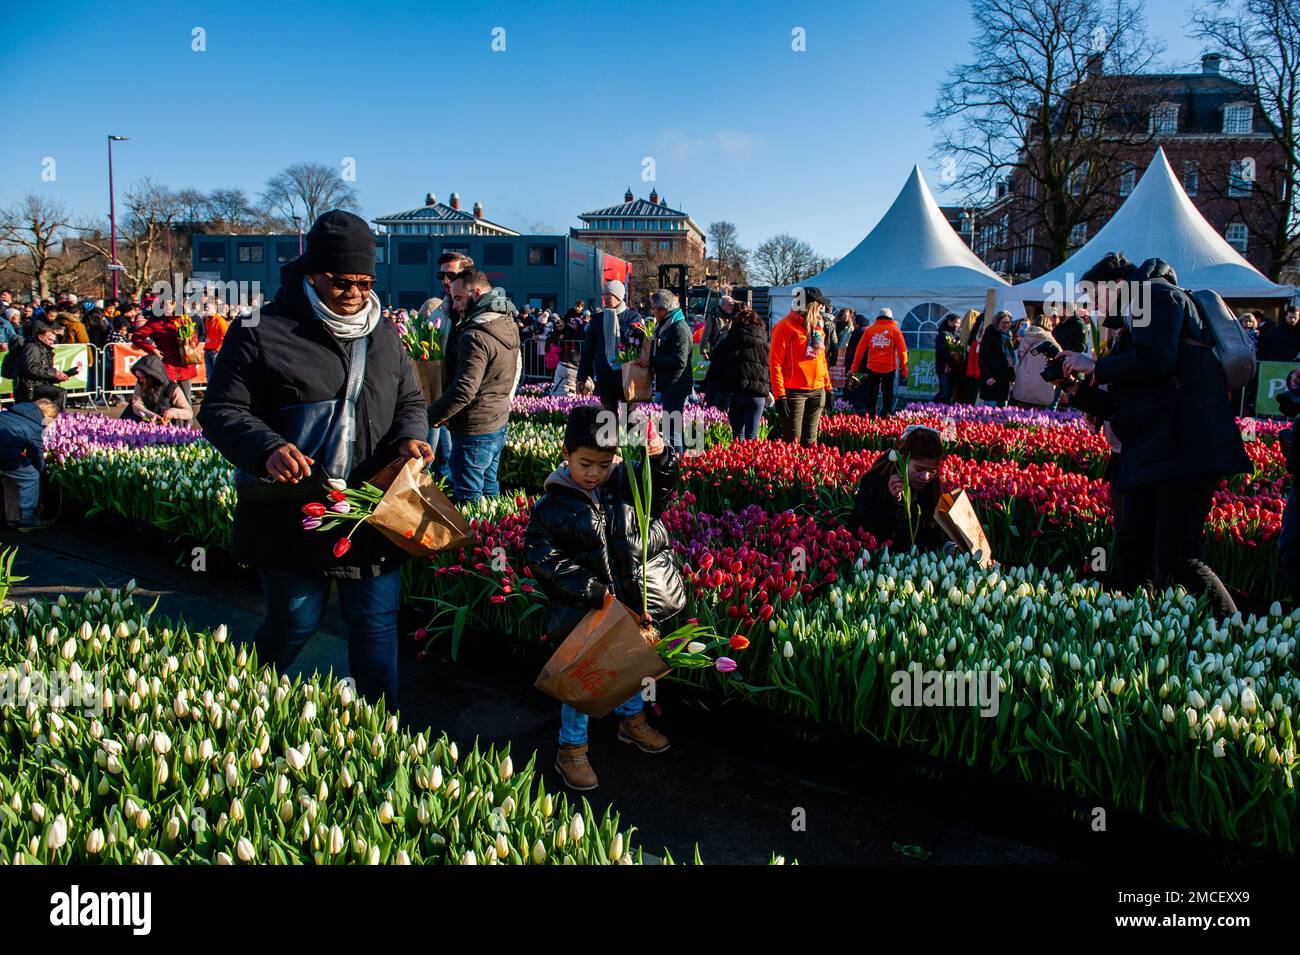 A father and his son are seen walking with paper bags full of tulips. Each year on the 3rd Saturday of January, the National Tulip Day is celebrated in Amsterdam. Dutch tulip growers built a huge picking garden with more than 200,000 colorful tulips at the Museumplein in Amsterdam. Visitors are allowed to pick tulips for free. The event was opened by Olympic skating champion, Irene Schouten. Prior to the opening, she christened a new tulip: Tulipa 'Dutch Pearl' as a reference to the world - famous painting 'The girl with a pearl earring' by Johannes Vermeer. (Photo by Ana Fernandez/SOPA Imag Stock Photo